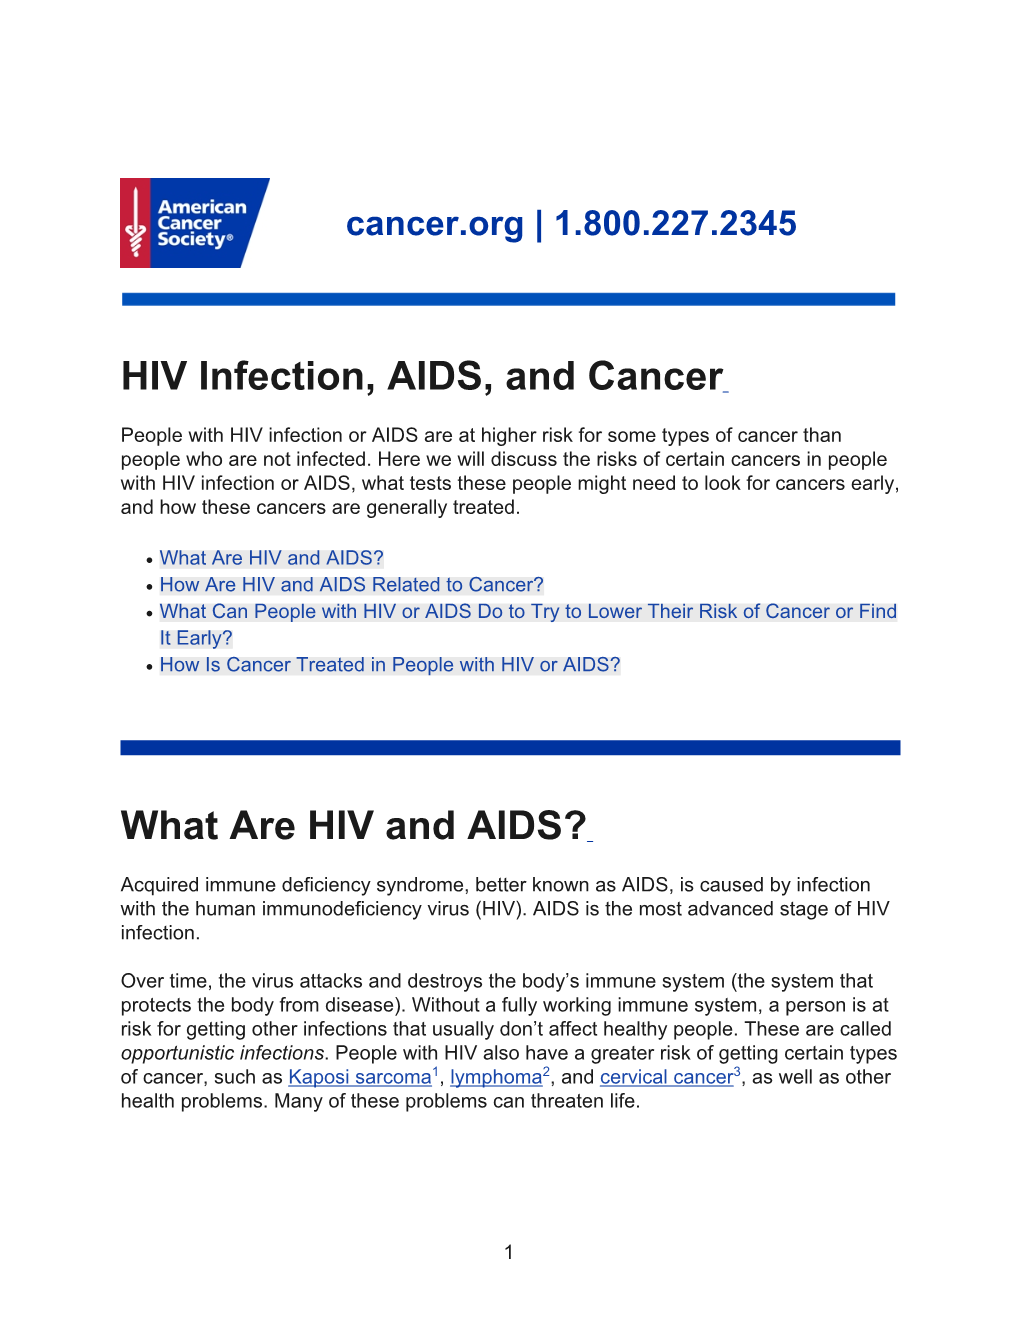 HIV Infection, AIDS, and Cancer